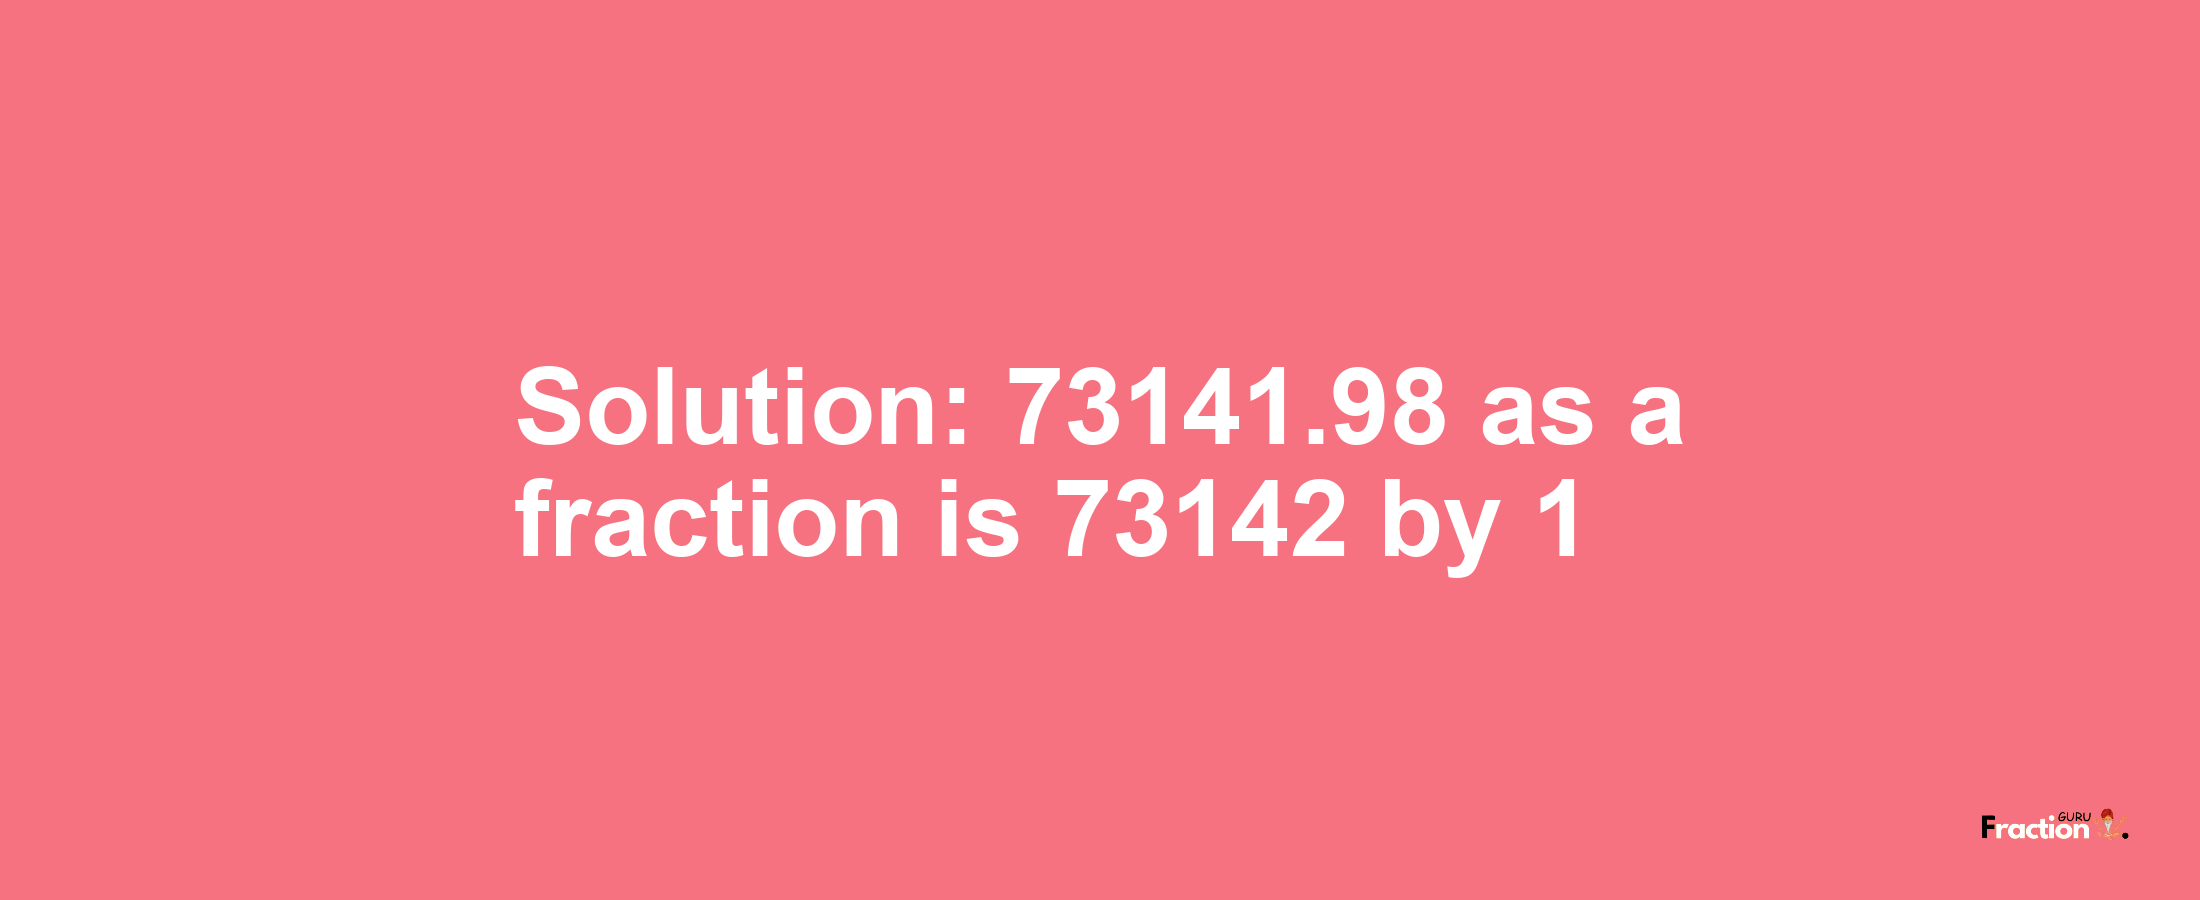 Solution:73141.98 as a fraction is 73142/1